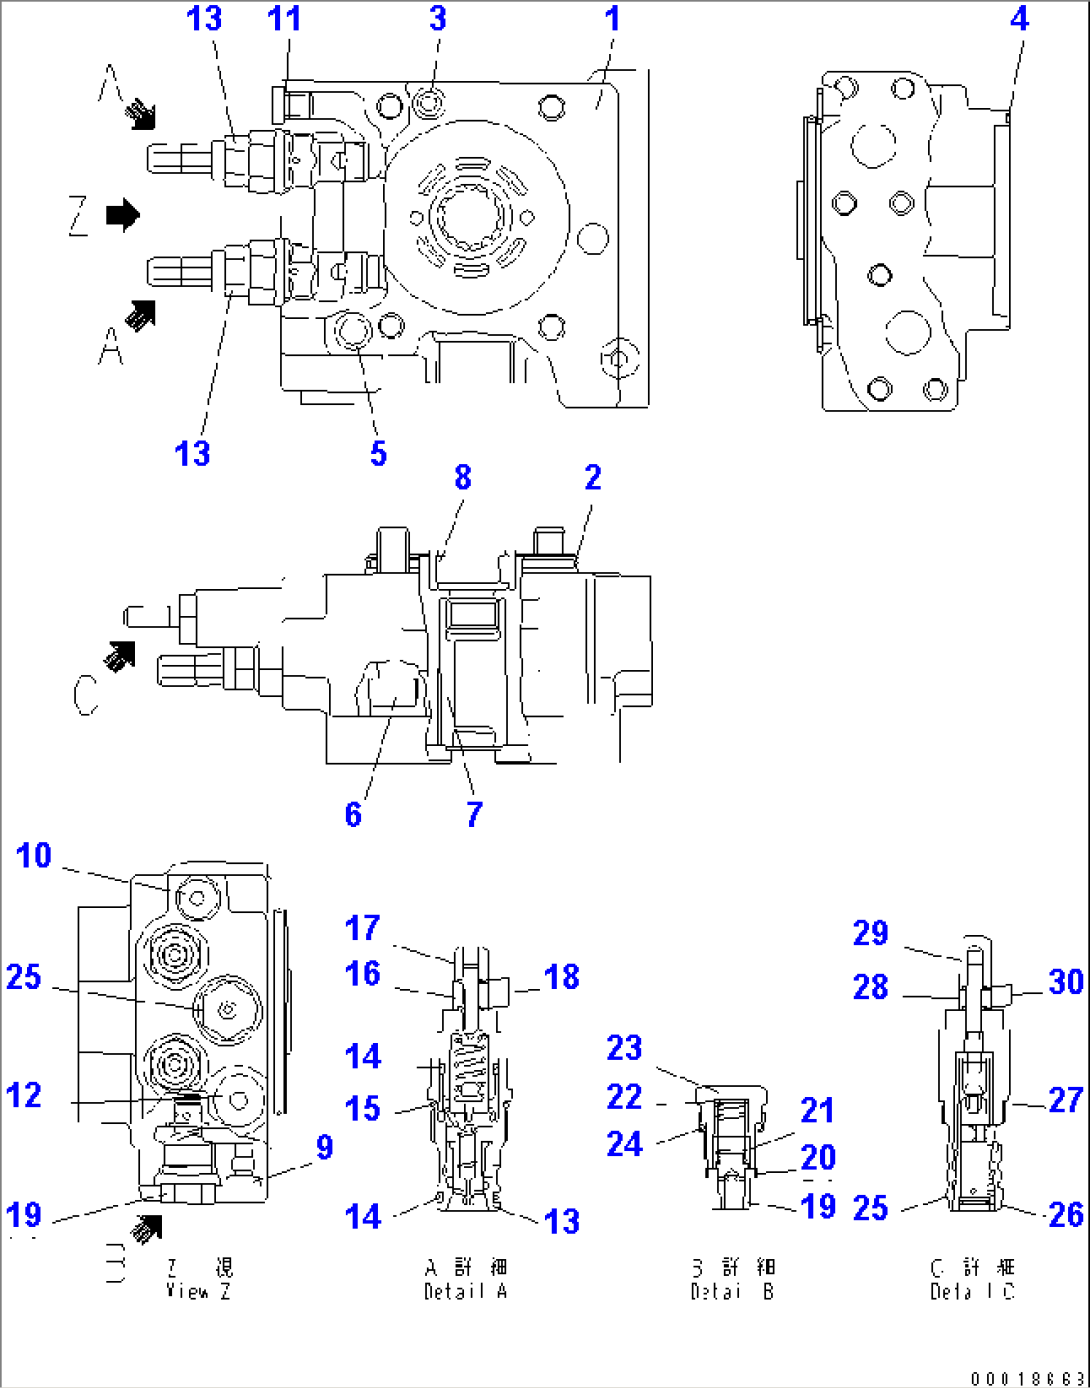 MAIN PUMP (PISTON PUMP INNER PARTS) (COVER AND RELIEF VALVE)